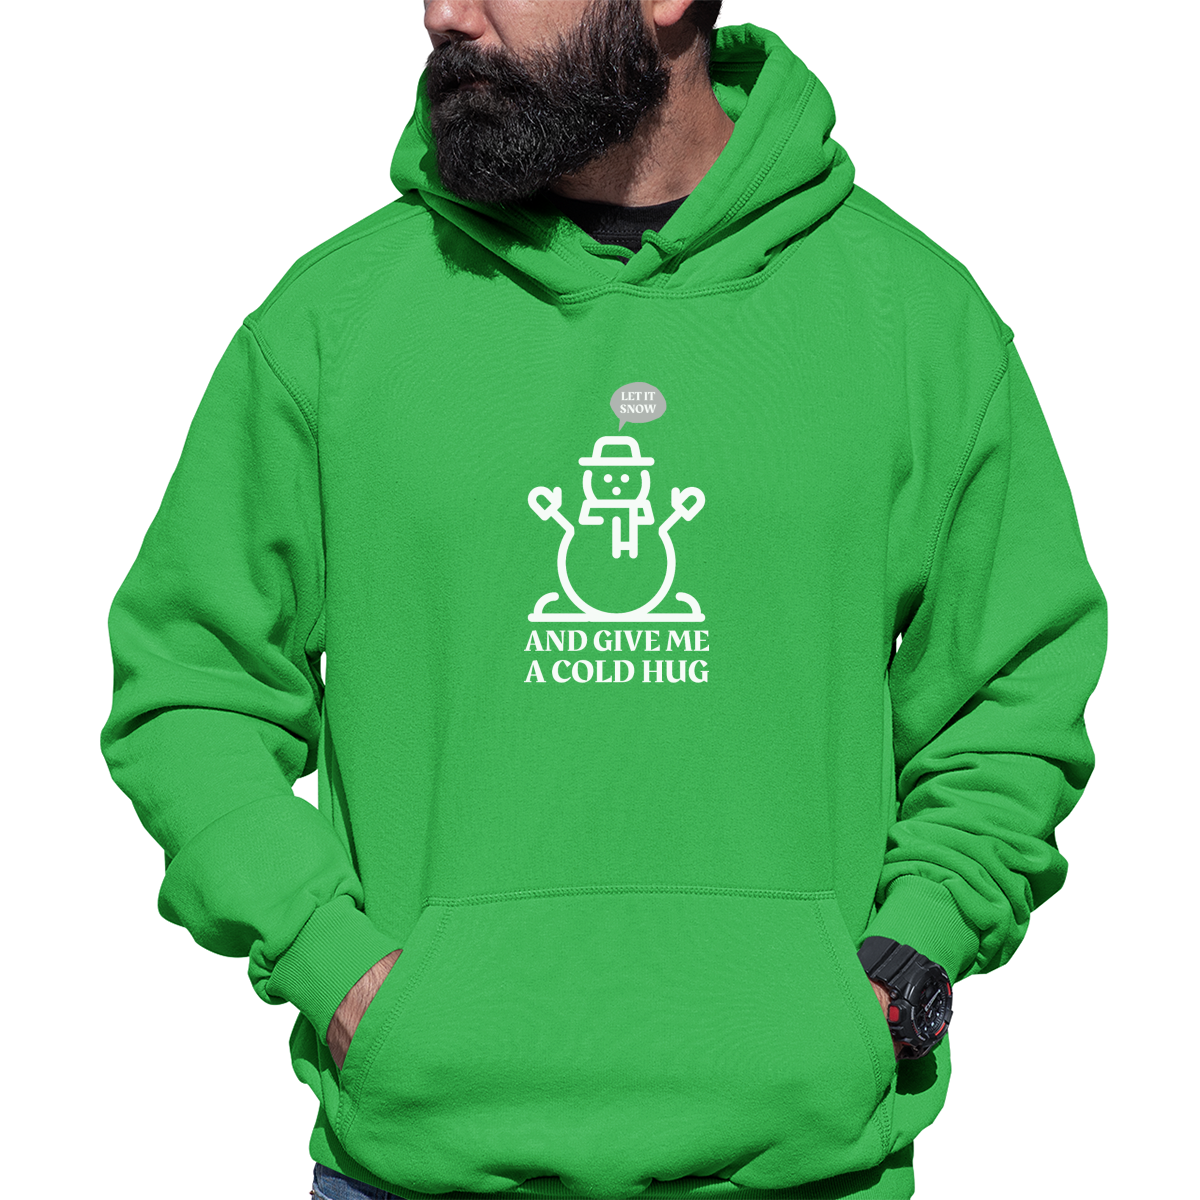 Let It Snow and Give Me a Cold Hug Unisex Hoodie | Green